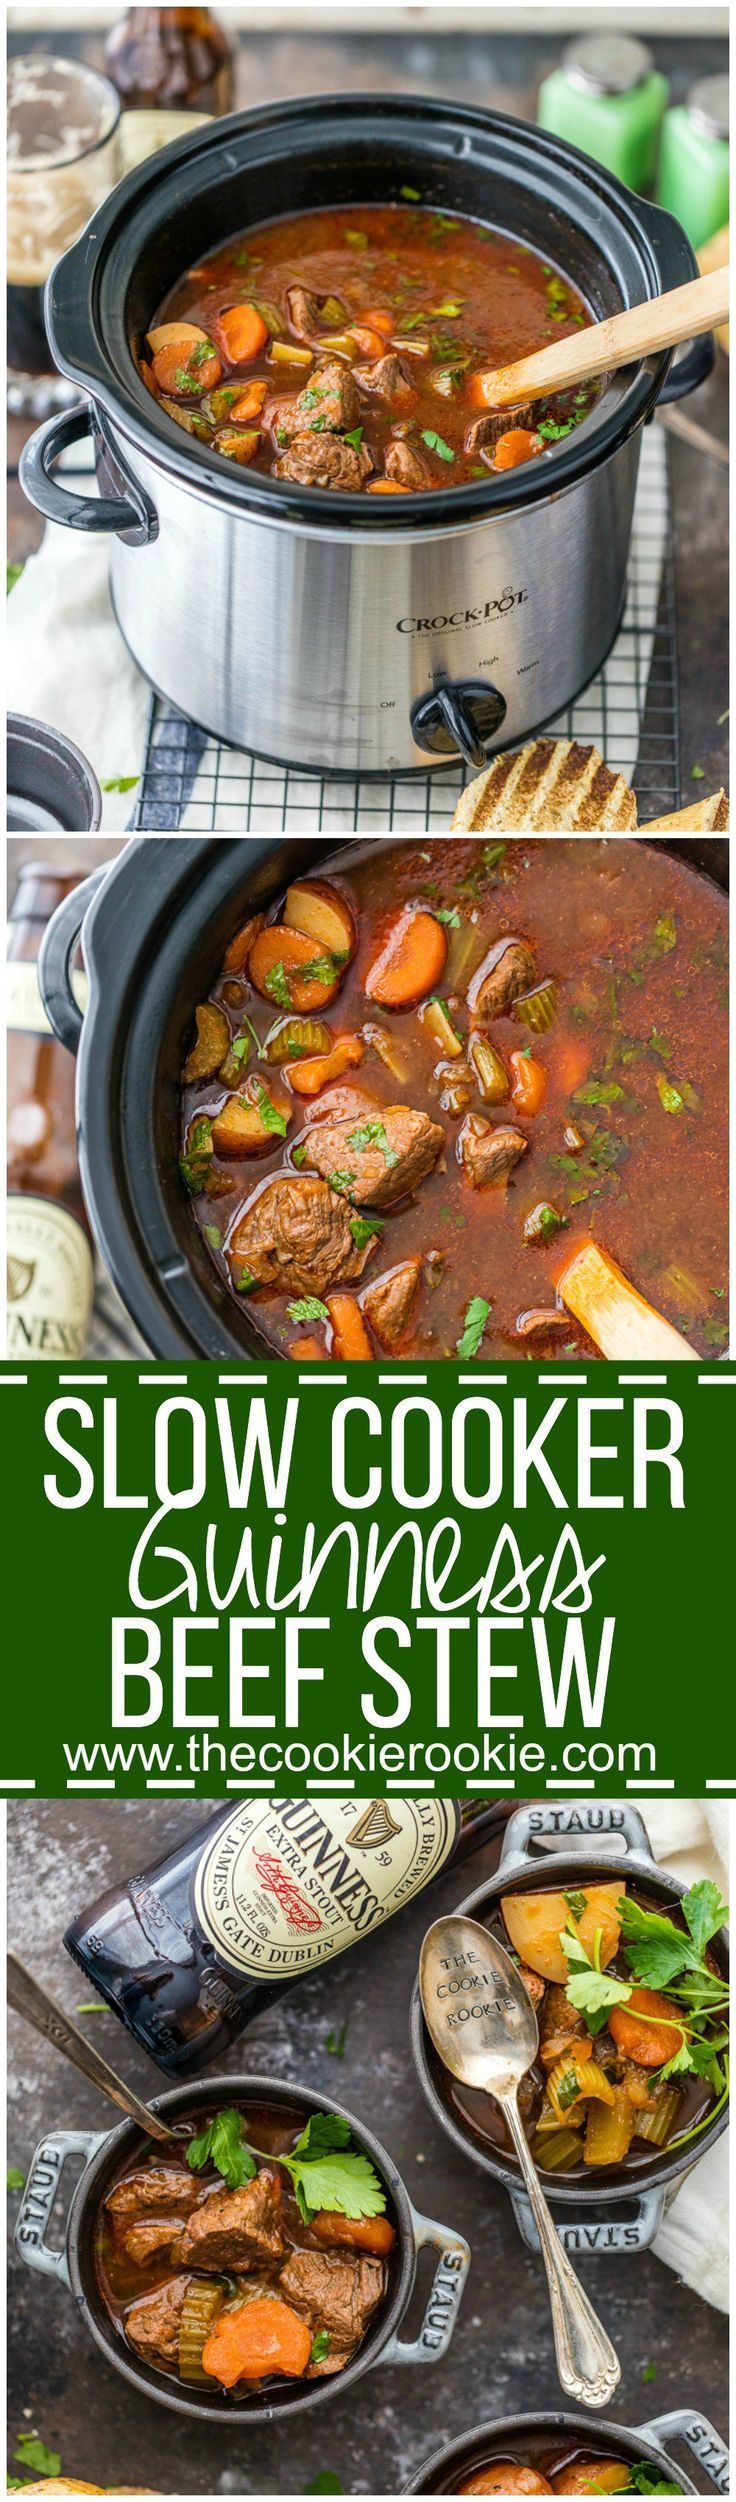 Slow Cooker Guinness Beef Stew is a favorite Irish recipe in our house! We make this crockpot beef soup for St. Patricks Day and